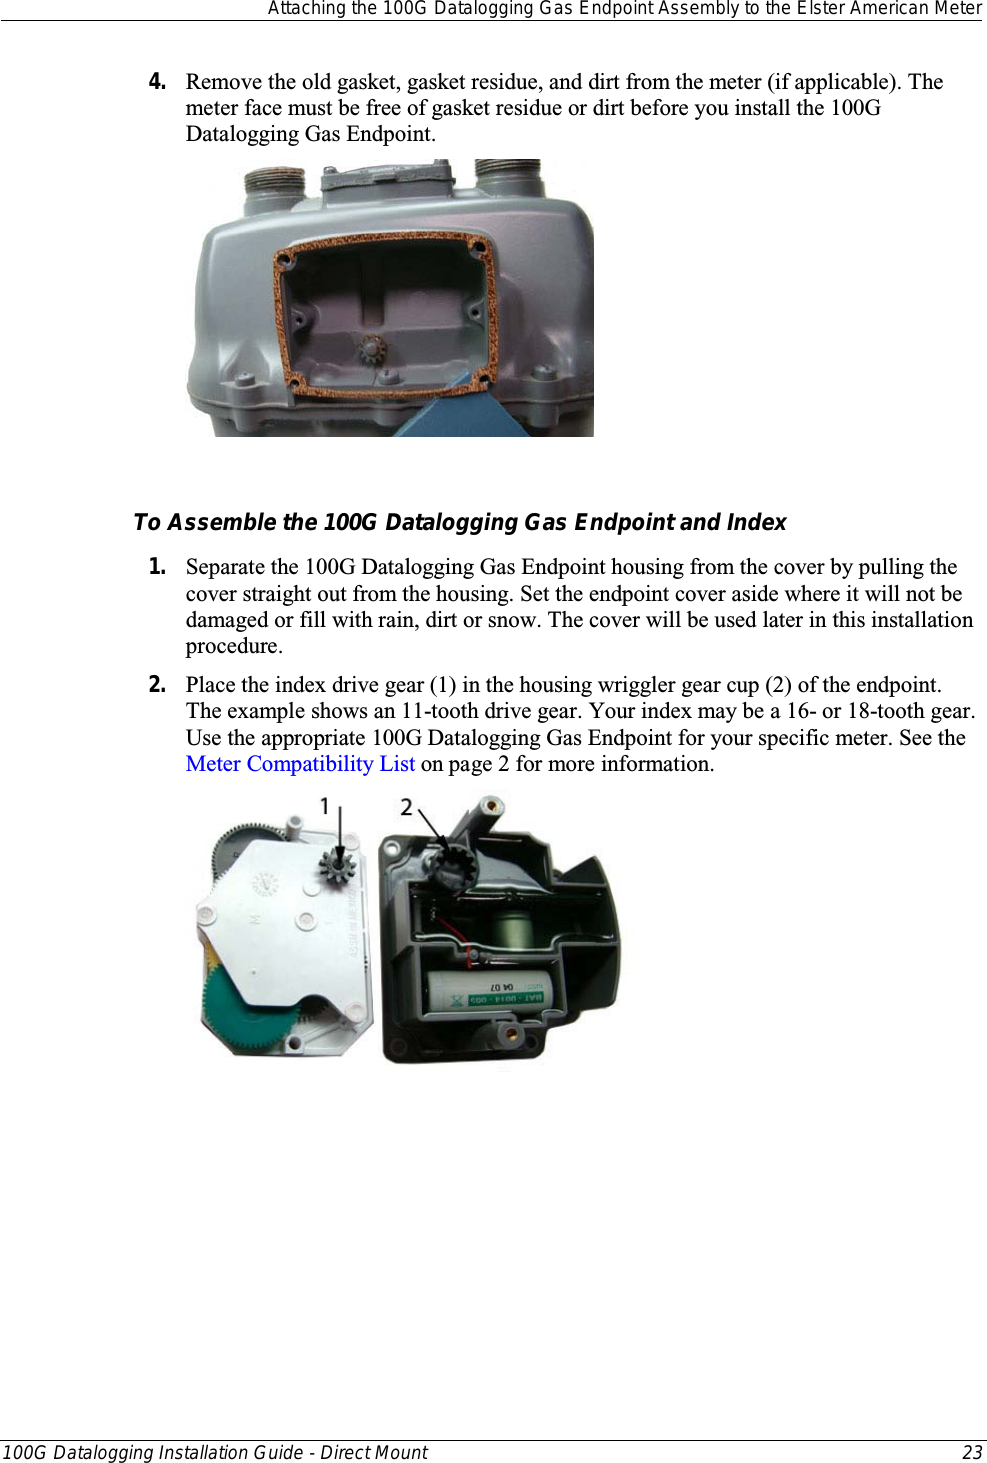  Attaching the 100G Datalogging Gas Endpoint Assembly to the Elster American Meter  100G Datalogging Installation Guide - Direct Mount 23  4. Remove the old gasket, gasket residue, and dirt from the meter (if applicable). The meter face must be free of gasket residue or dirt before you install the 100G Datalogging Gas Endpoint.     To Assemble the 100G Datalogging Gas Endpoint and Index 1. Separate the 100G Datalogging Gas Endpoint housing from the cover by pulling the cover straight out from the housing. Set the endpoint cover aside where it will not be damaged or fill with rain, dirt or snow. The cover will be used later in this installation procedure. 2. Place the index drive gear (1) in the housing wriggler gear cup (2) of the endpoint. The example shows an 11-tooth drive gear. Your index may be a 16- or 18-tooth gear. Use the appropriate 100G Datalogging Gas Endpoint for your specific meter. See the Meter Compatibility List on page 2 for more information.  